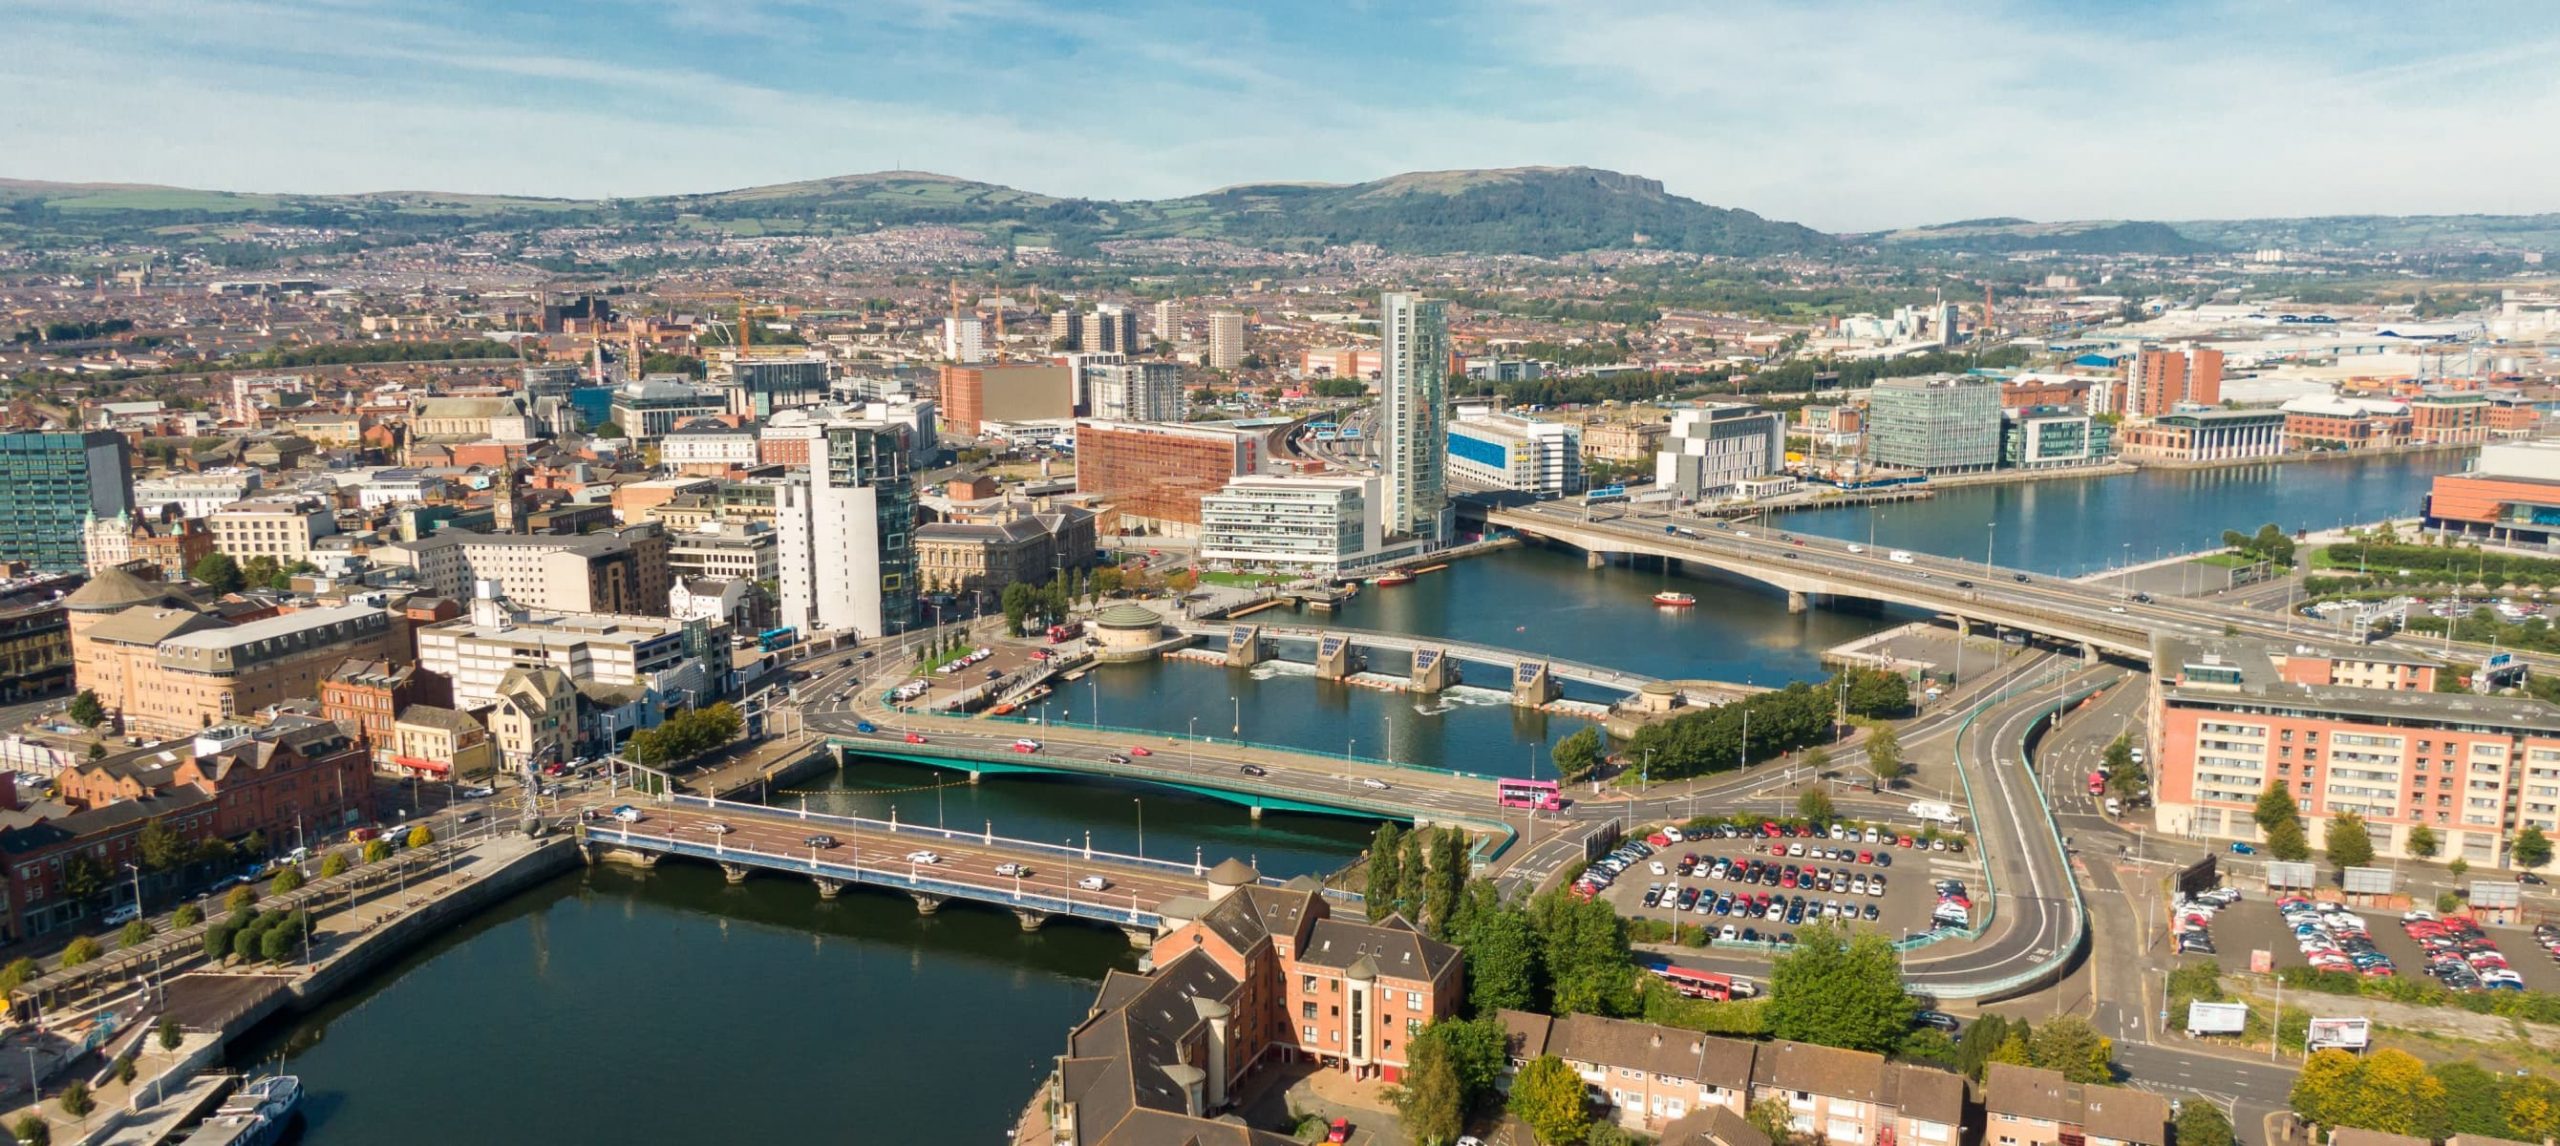 The city of Belfast, in Northern Ireland, seen from above.